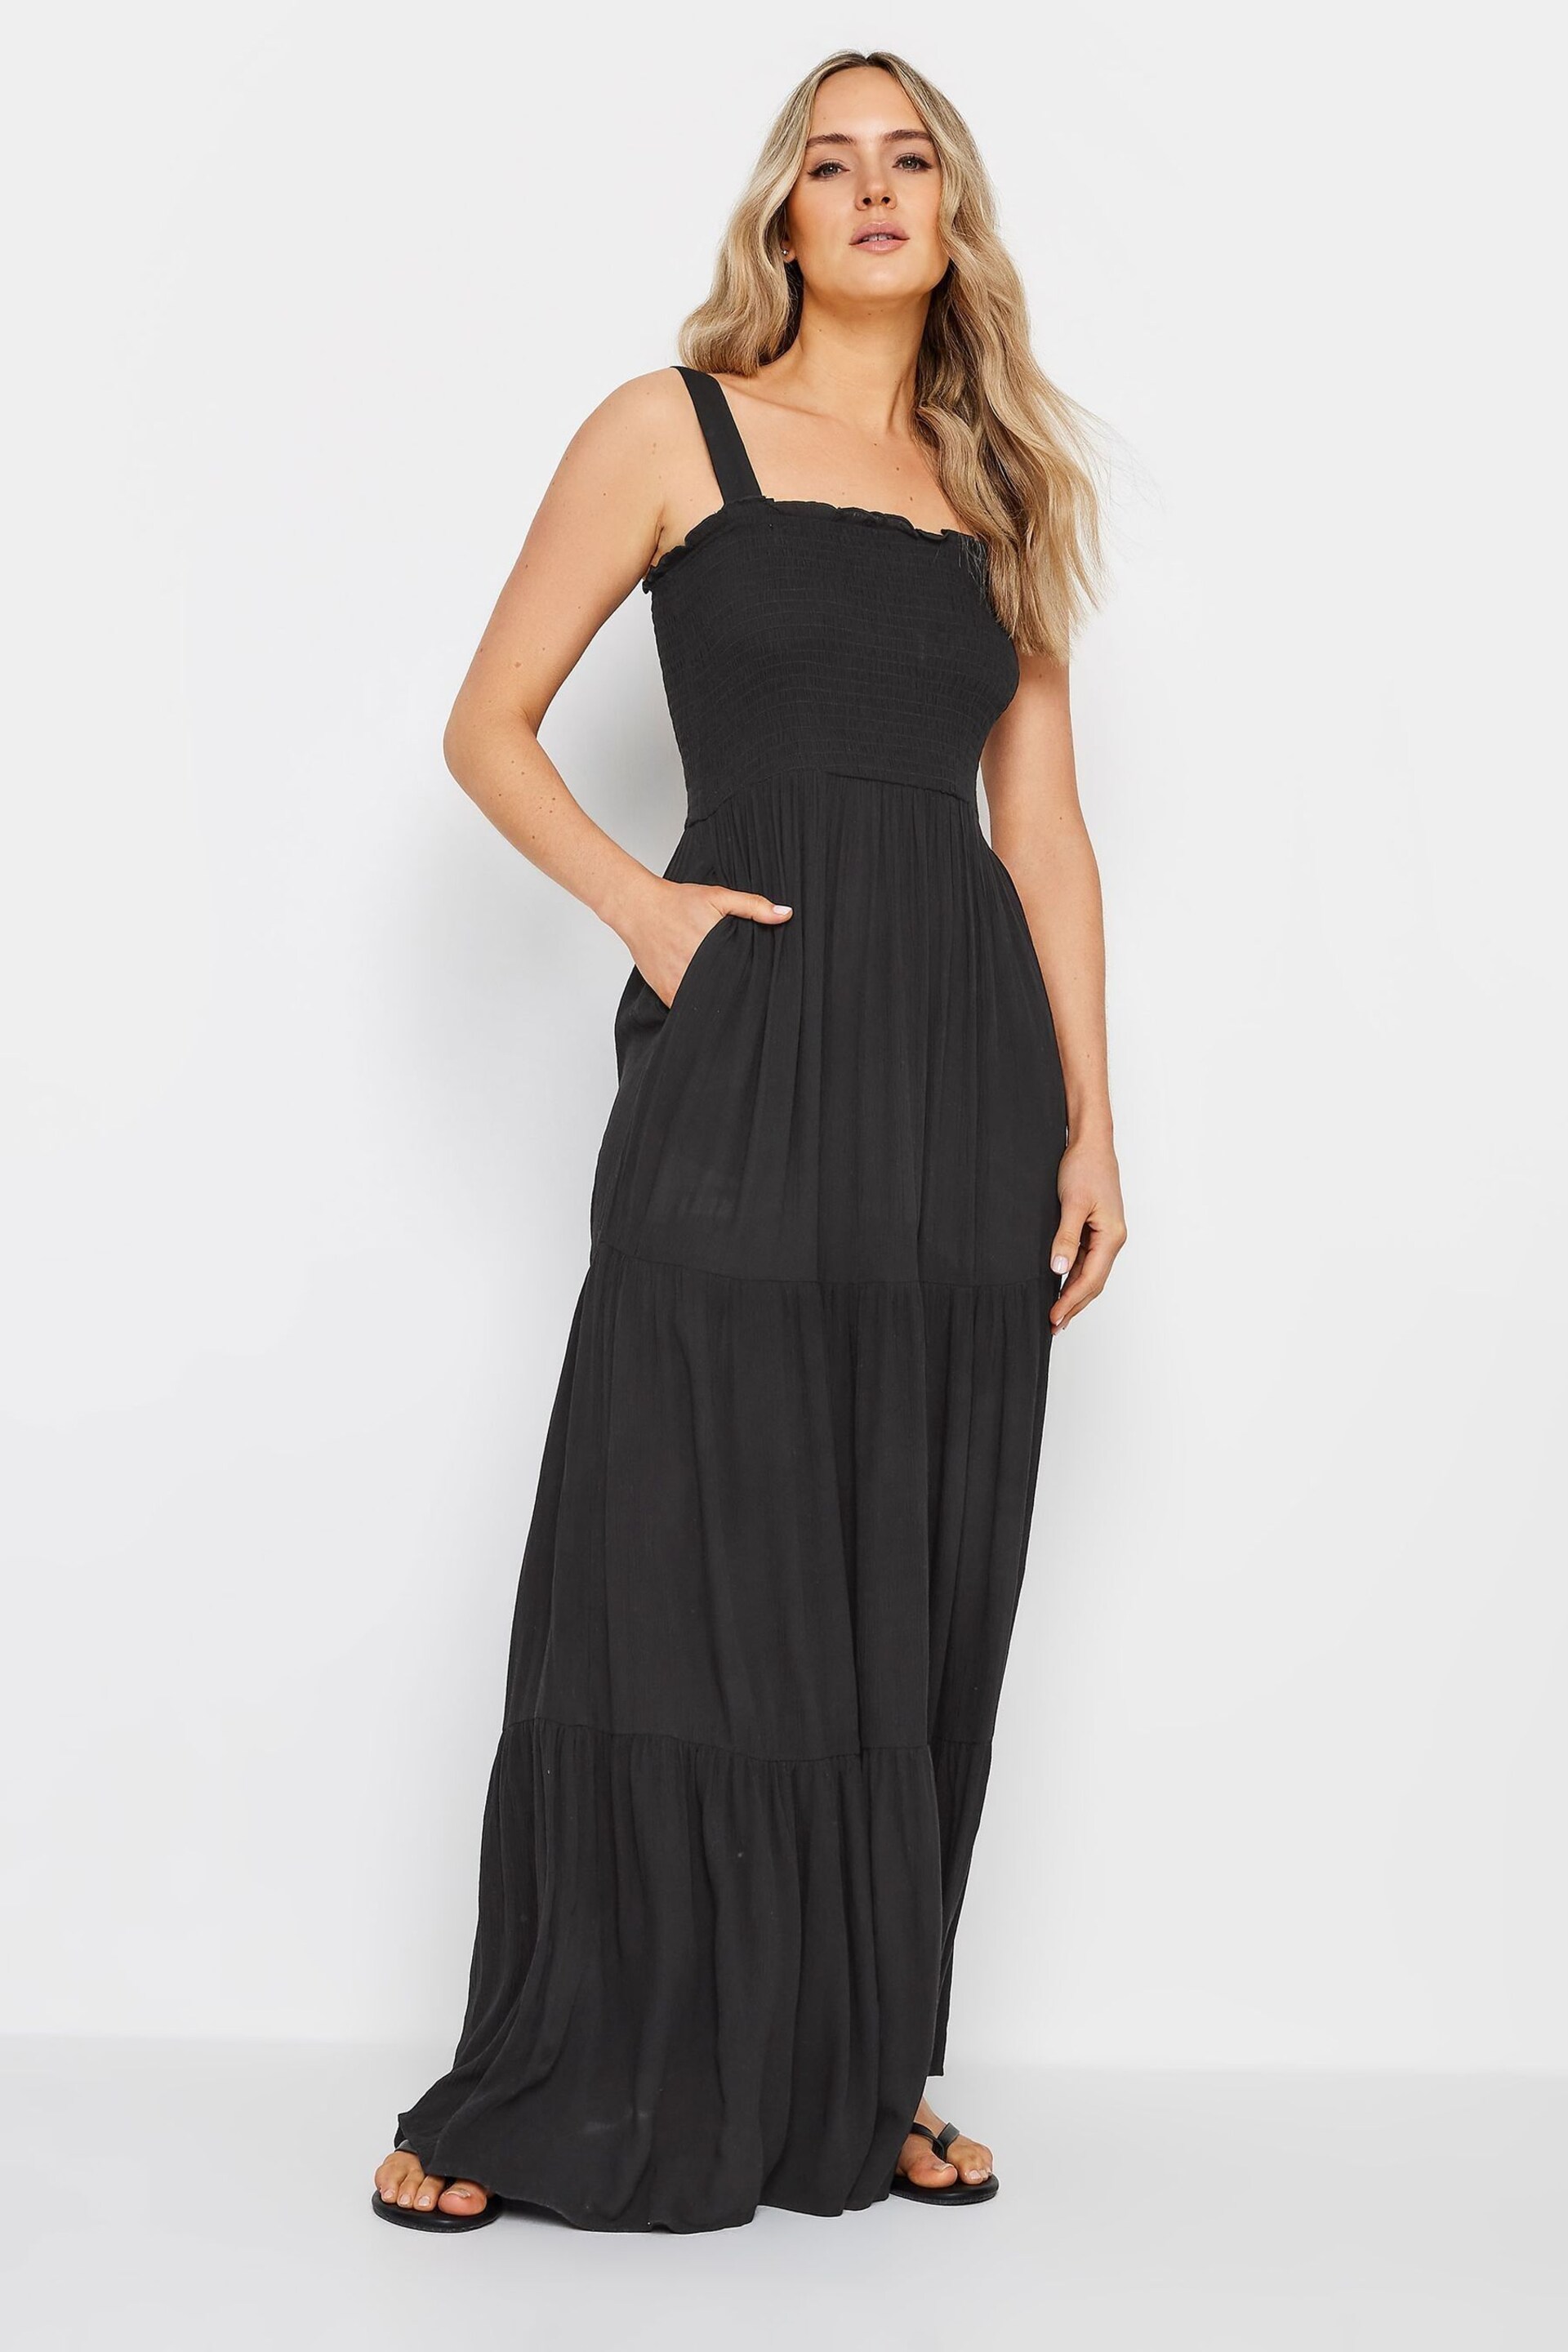 Long Tall Sally Black Crinkle Tiered Dress - Image 2 of 5